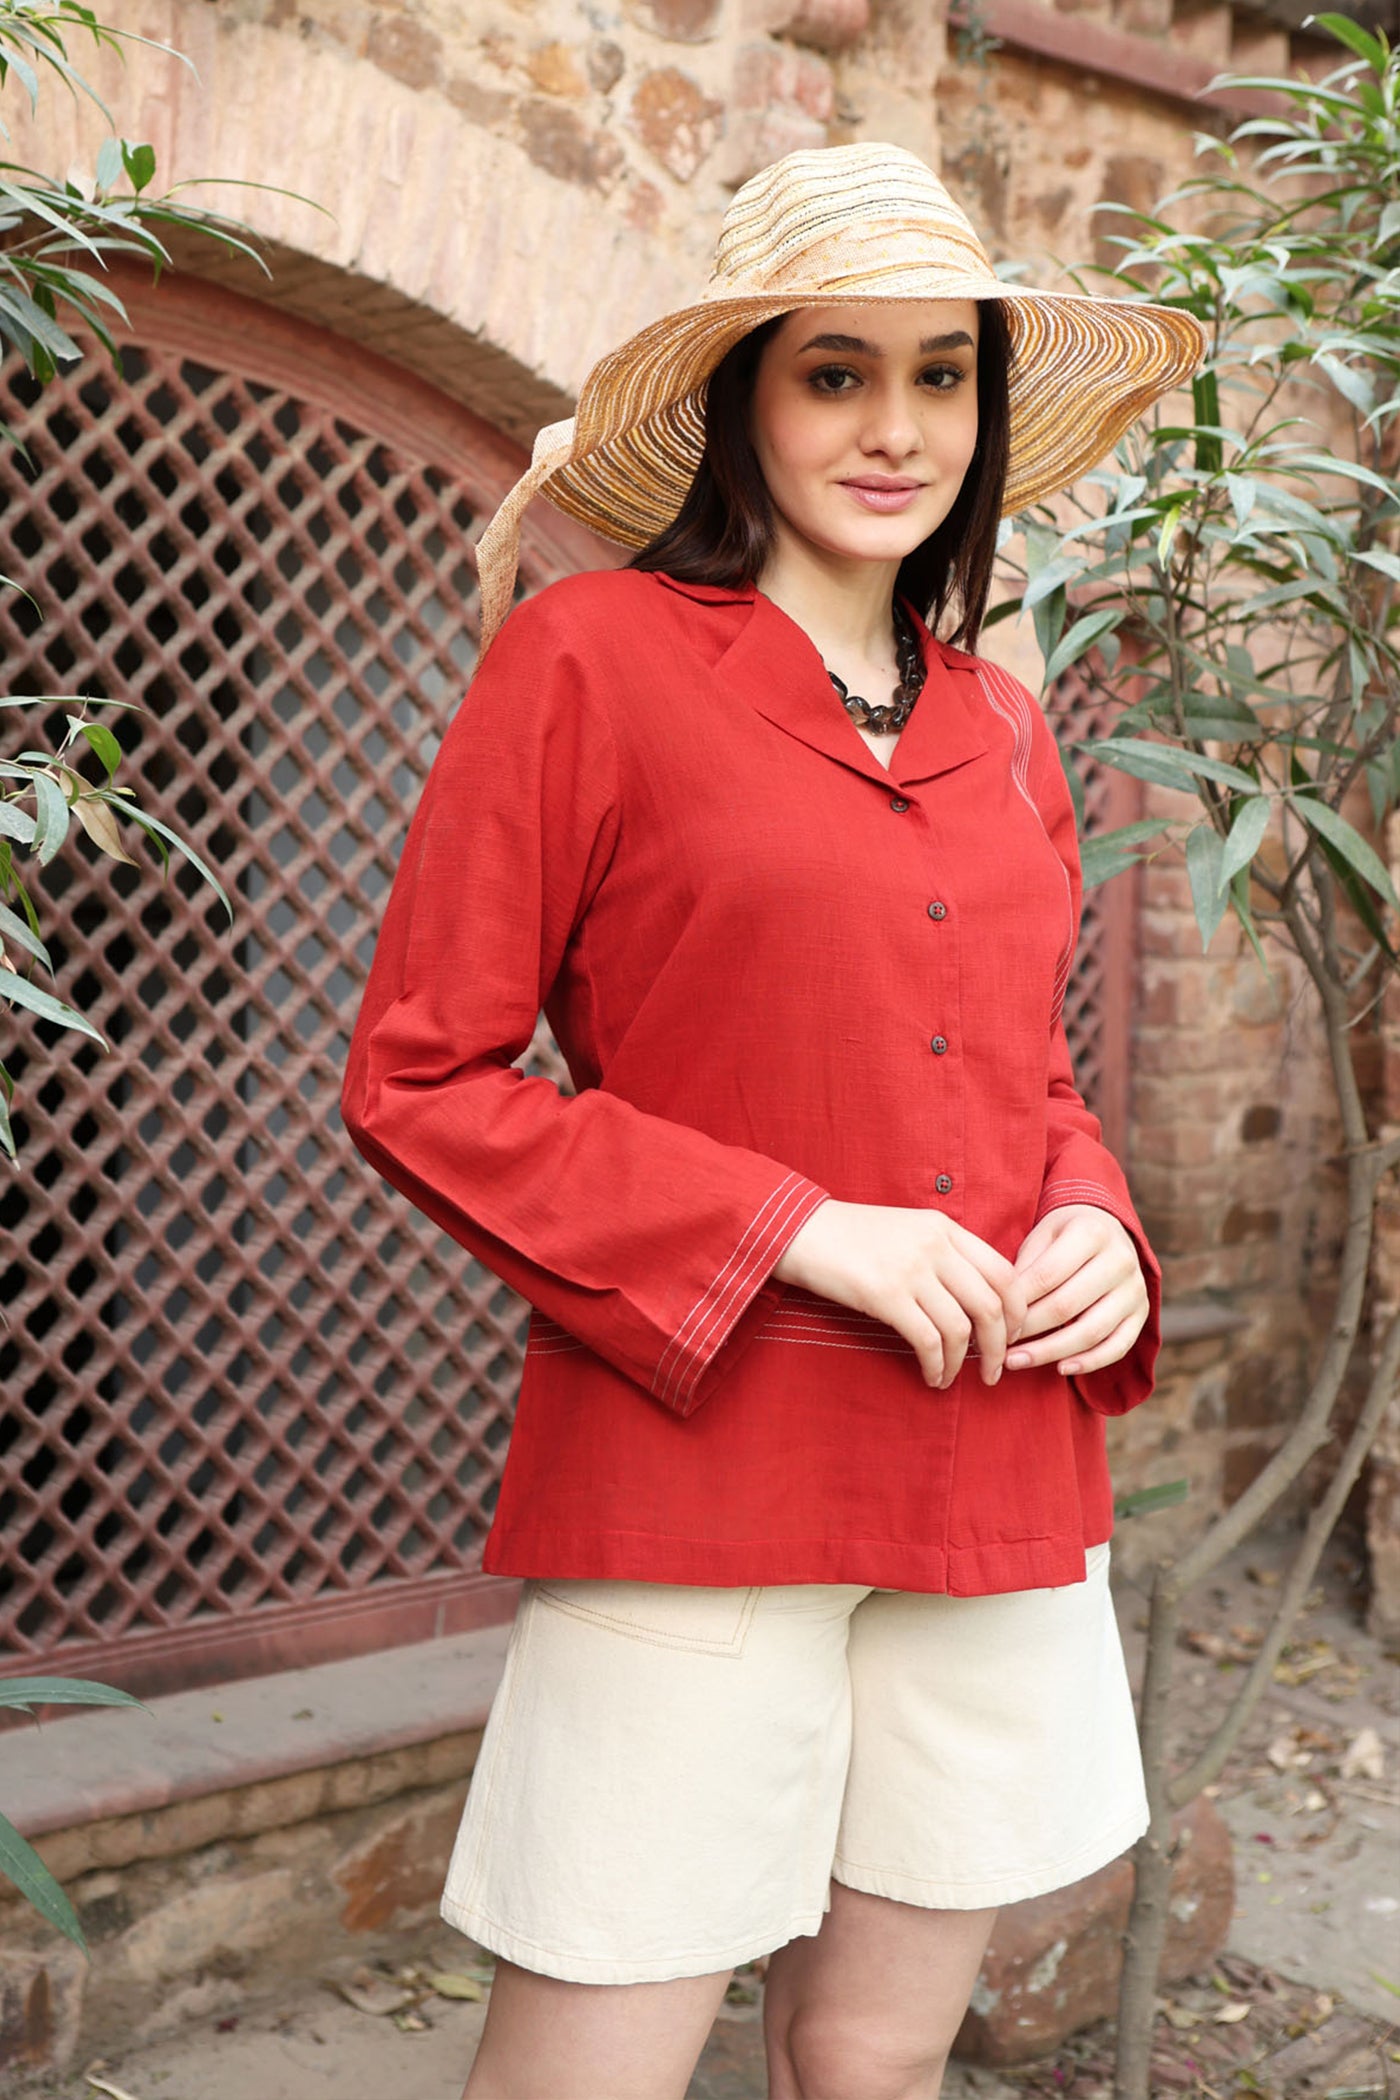 Dusty-Red Handloom Pure Linen-Cotton Collared Front-Open Short Blouse With Thereadwork-Detail